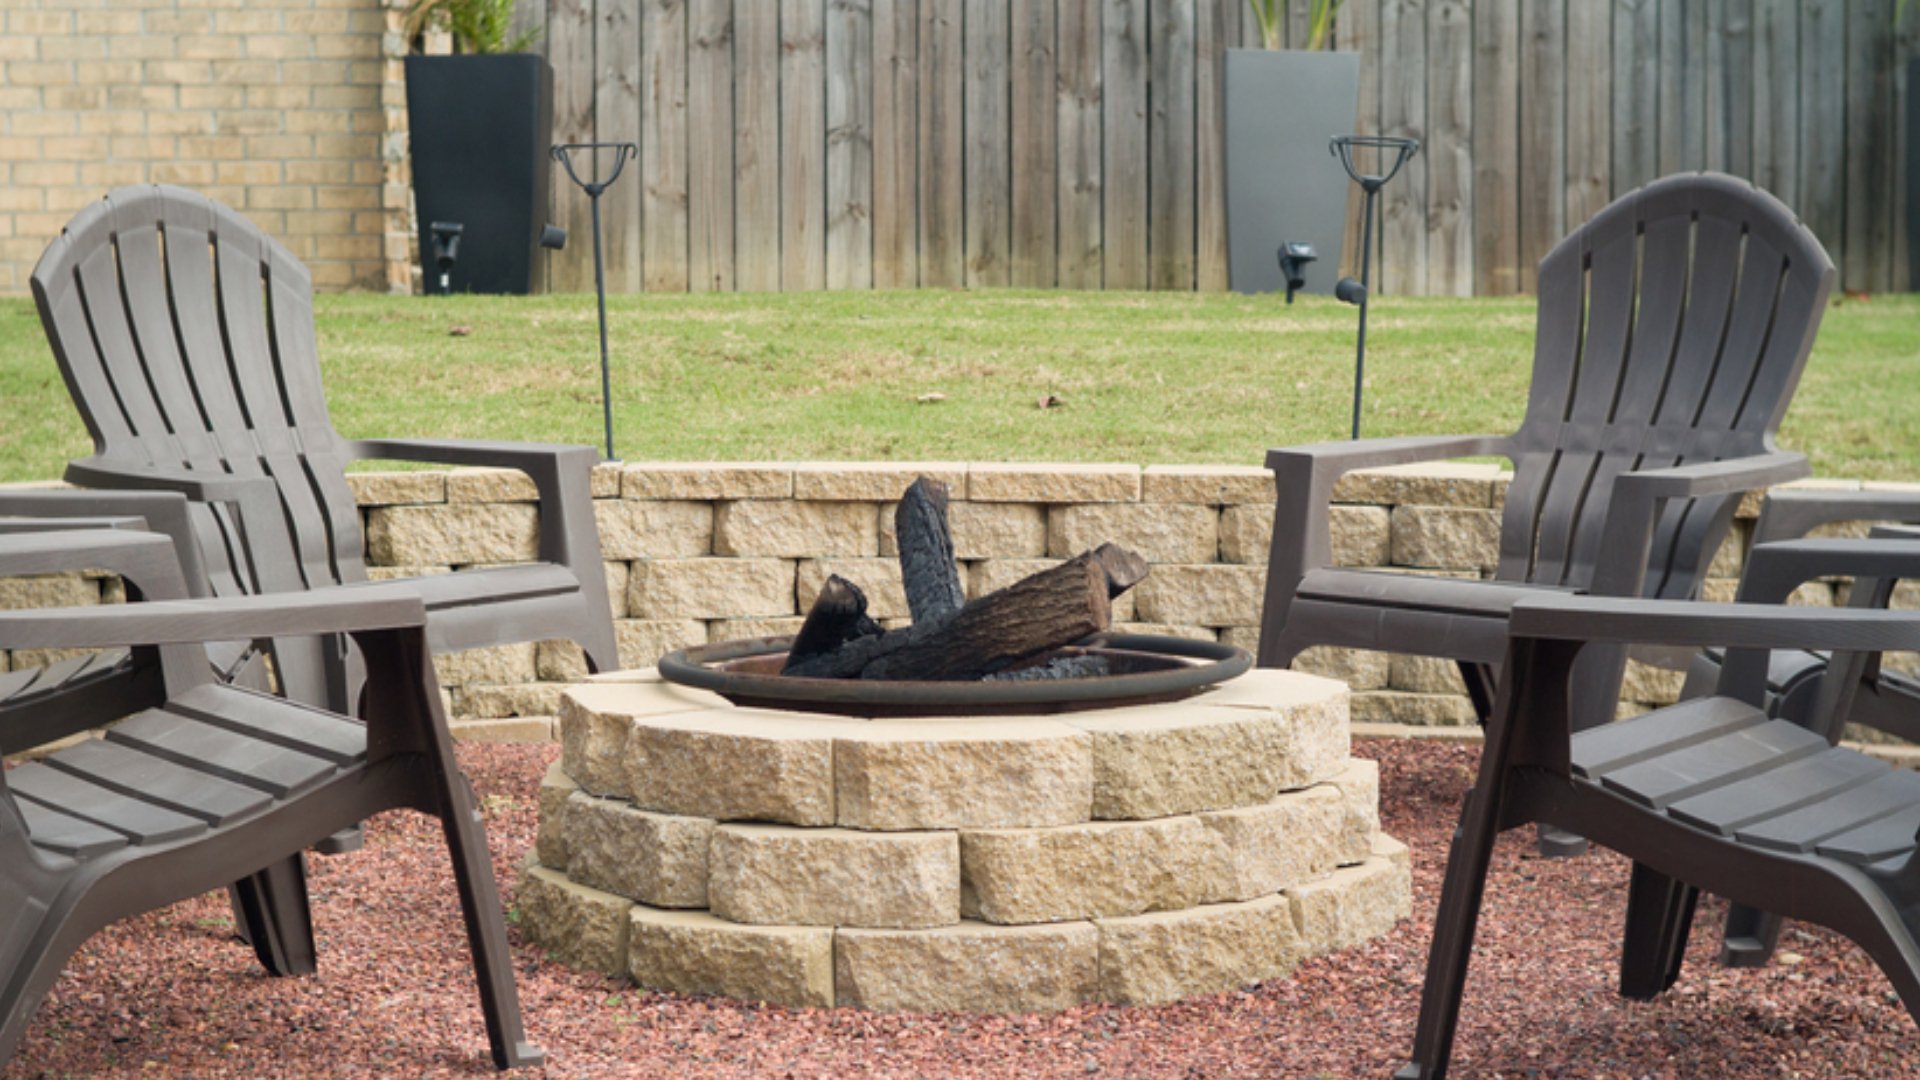 Consider These Things When Designing a Fire Pit From Scratch